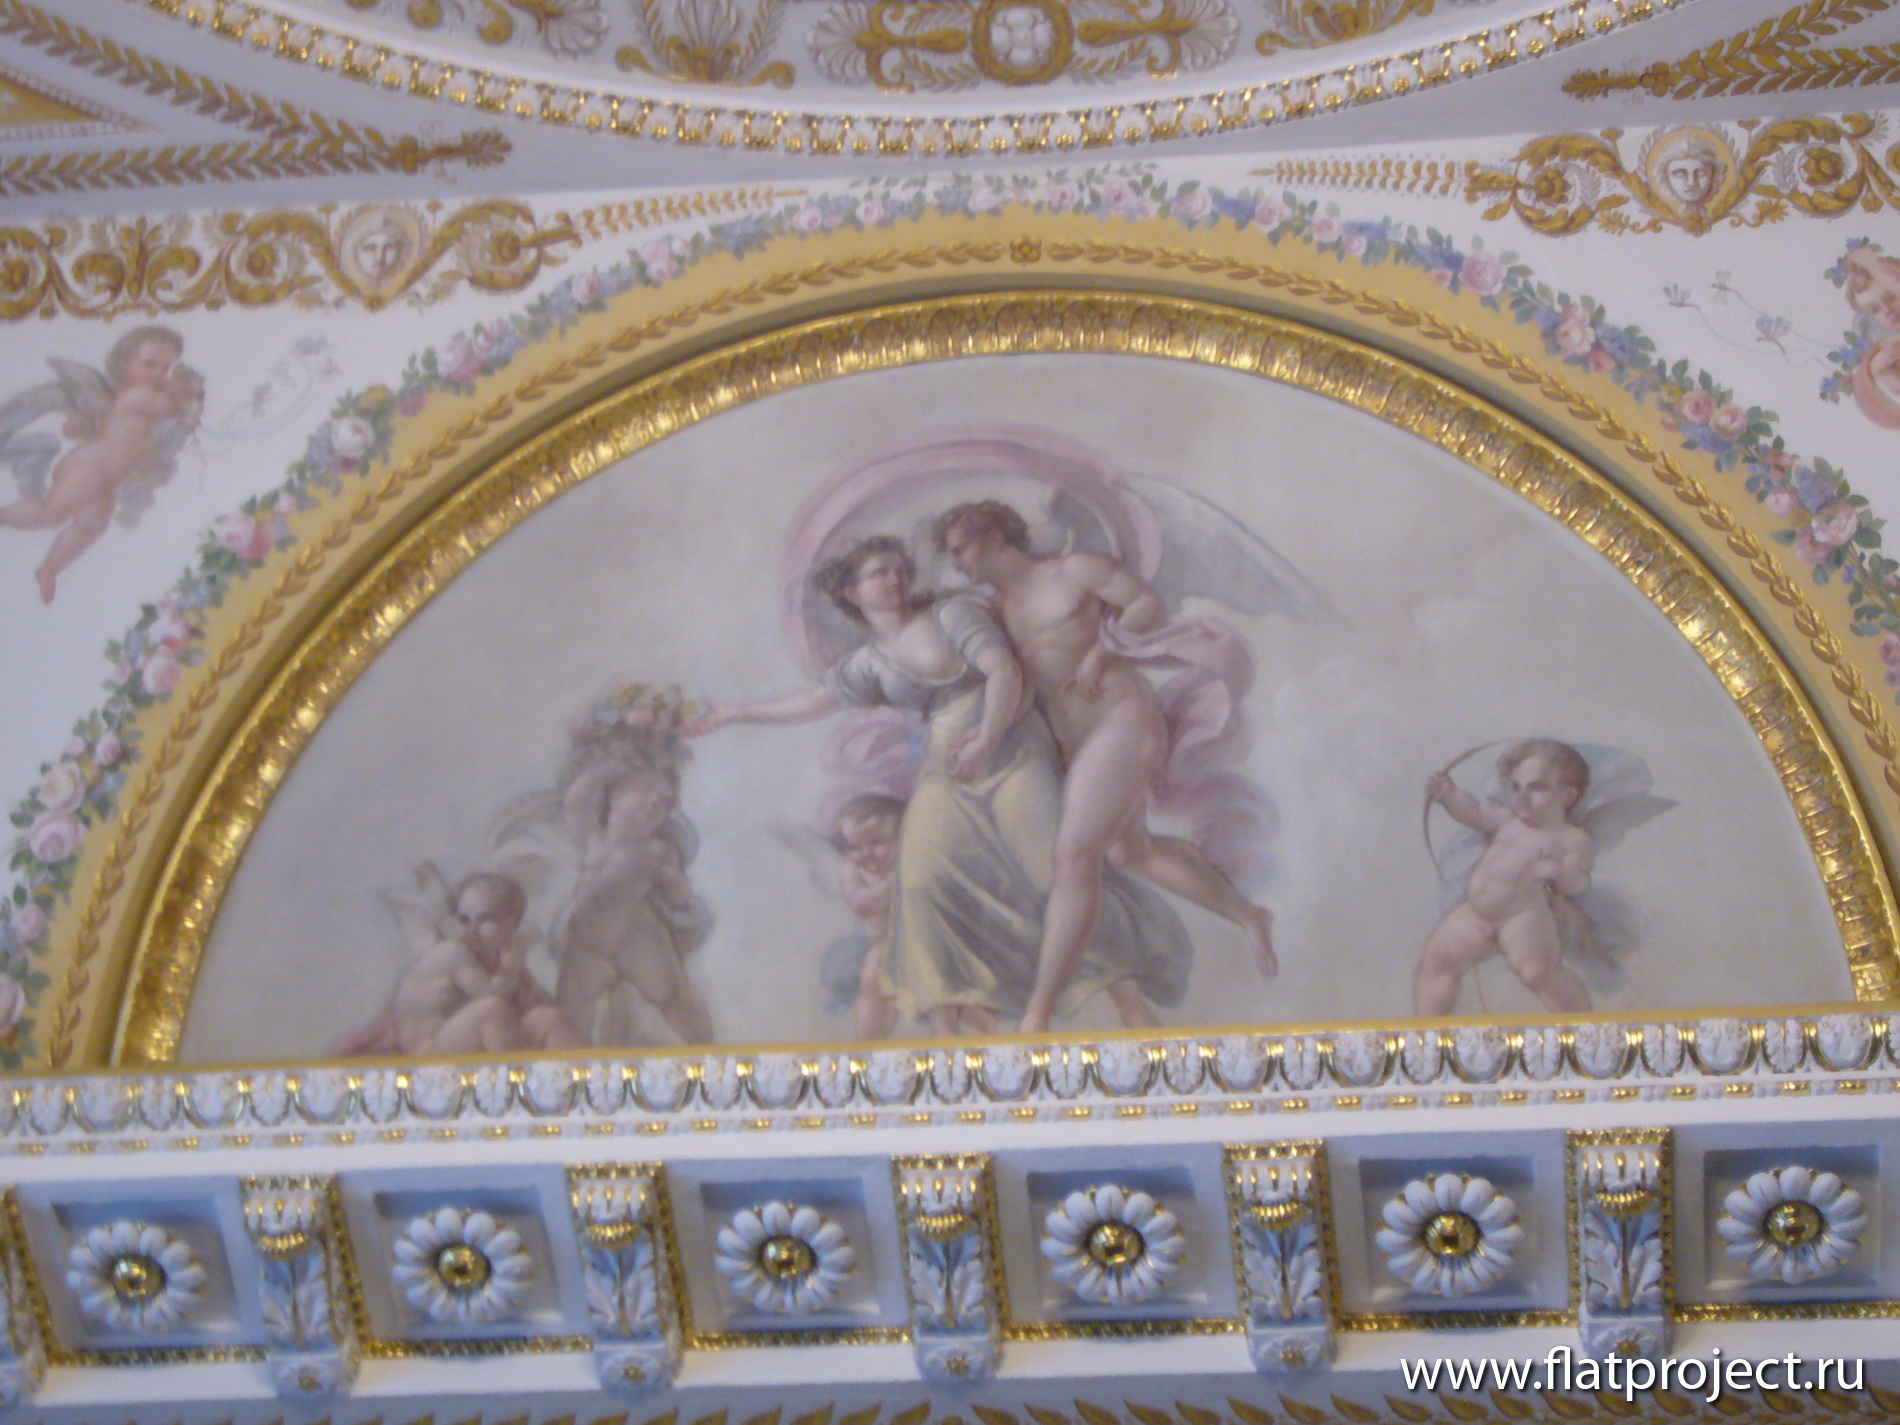 The State Russian museum interiors – photo 60